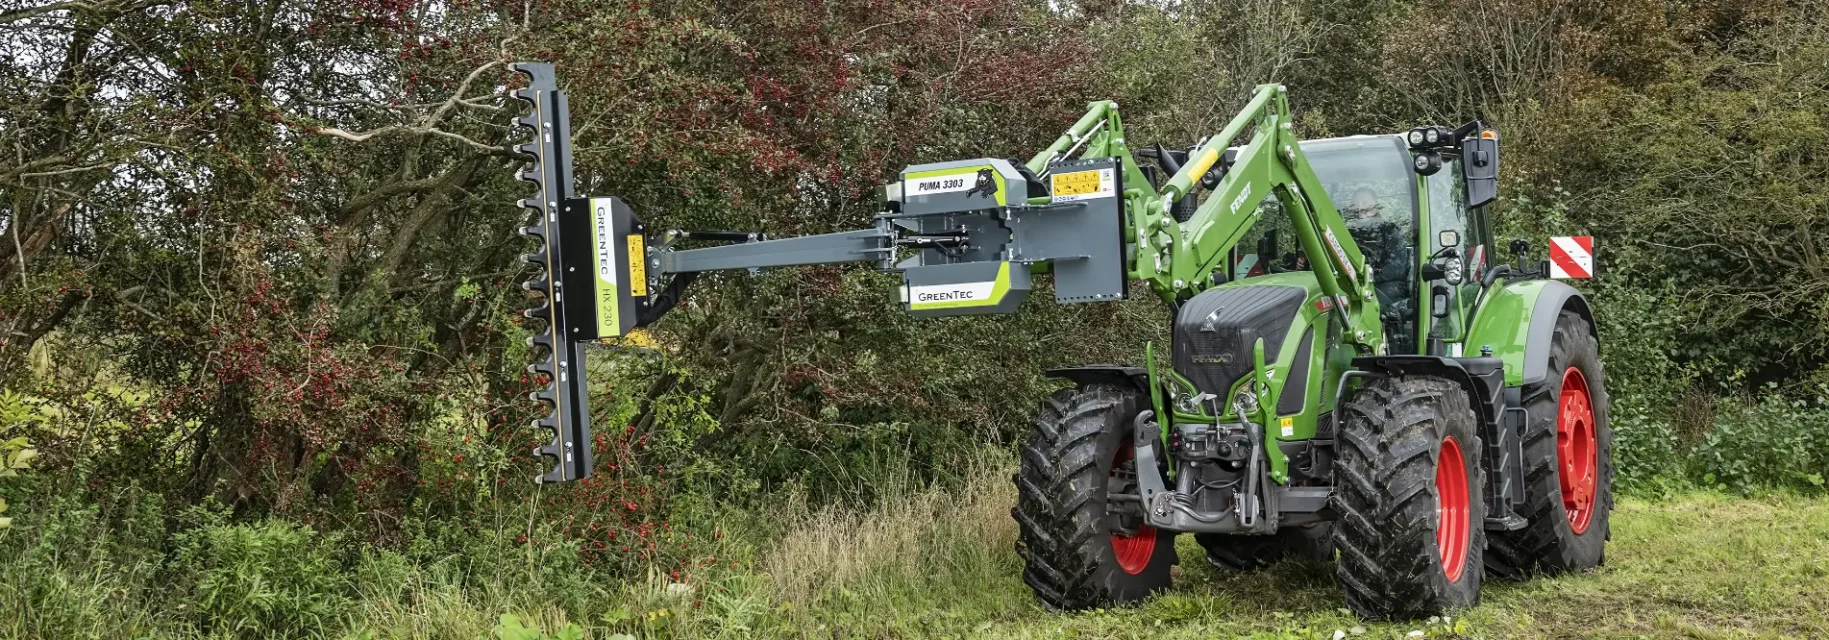 Tree cutter attachment for front end loader